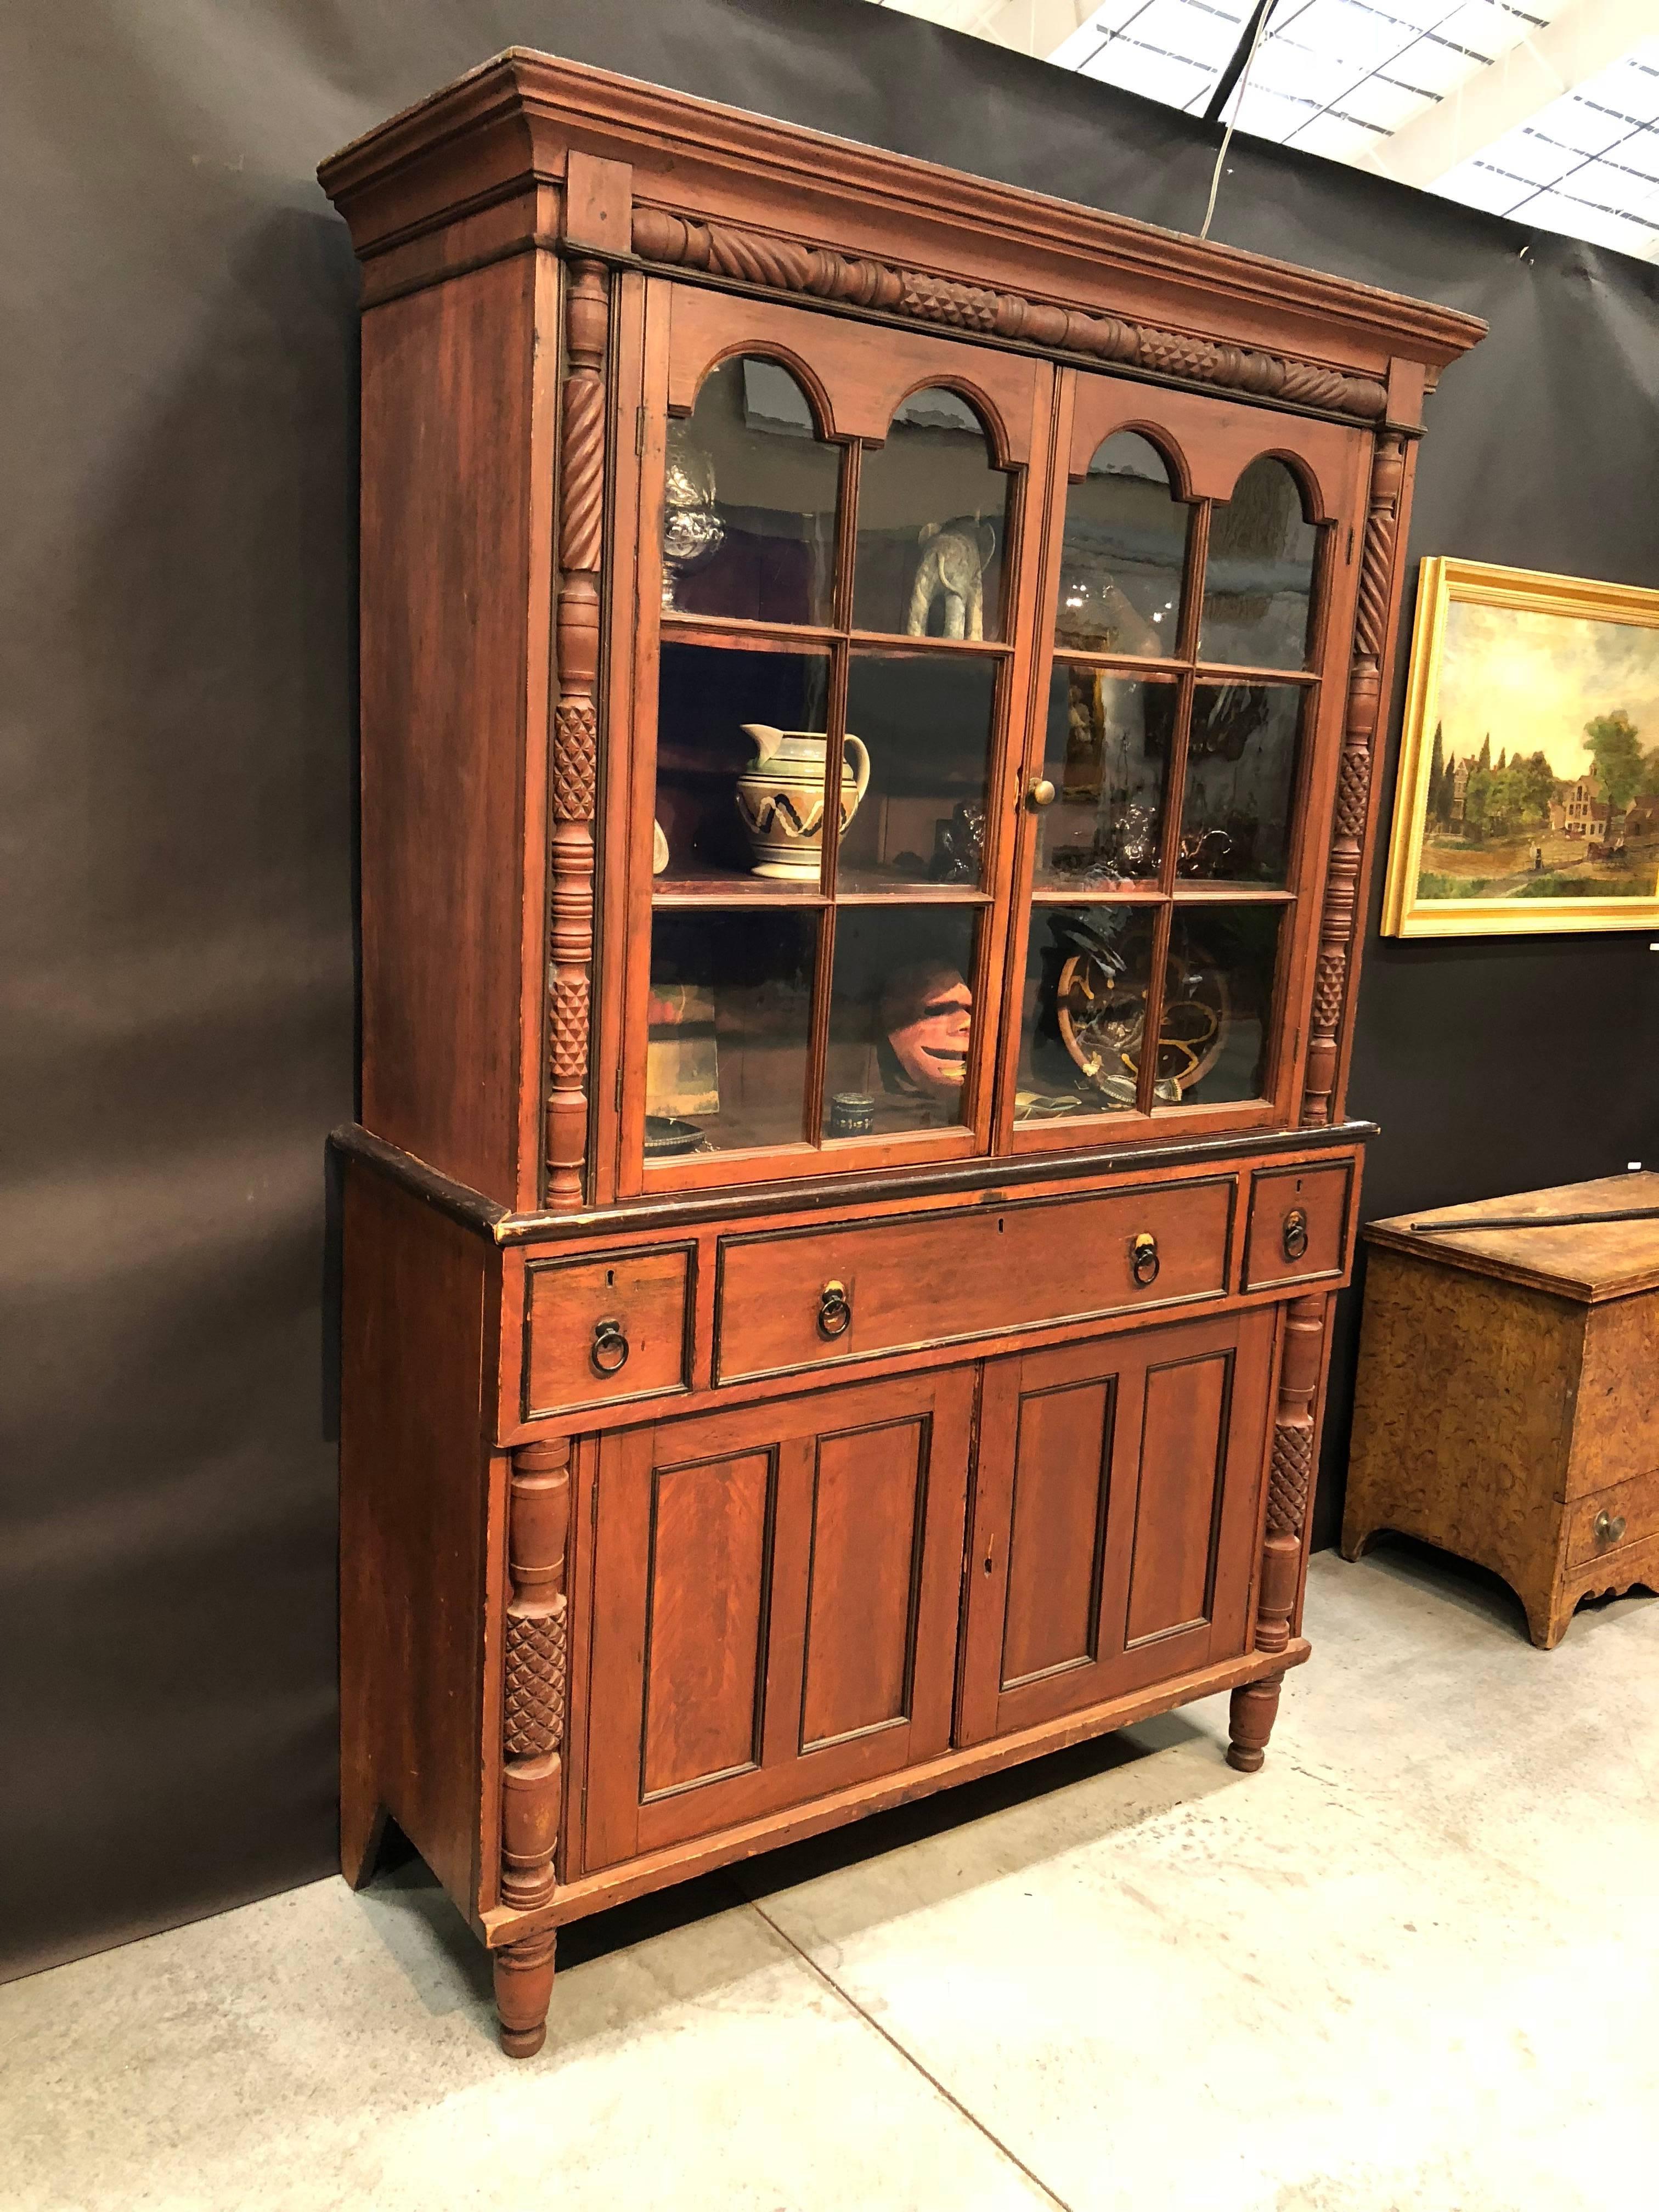 Flat wall cupboard two-piece red painted surface Hackensack, New Jersey, circa 1820.
Red paint decorated surface and two six pane glass doors base consisting of three drawers and two doors
Standing on turn feet all original.
 